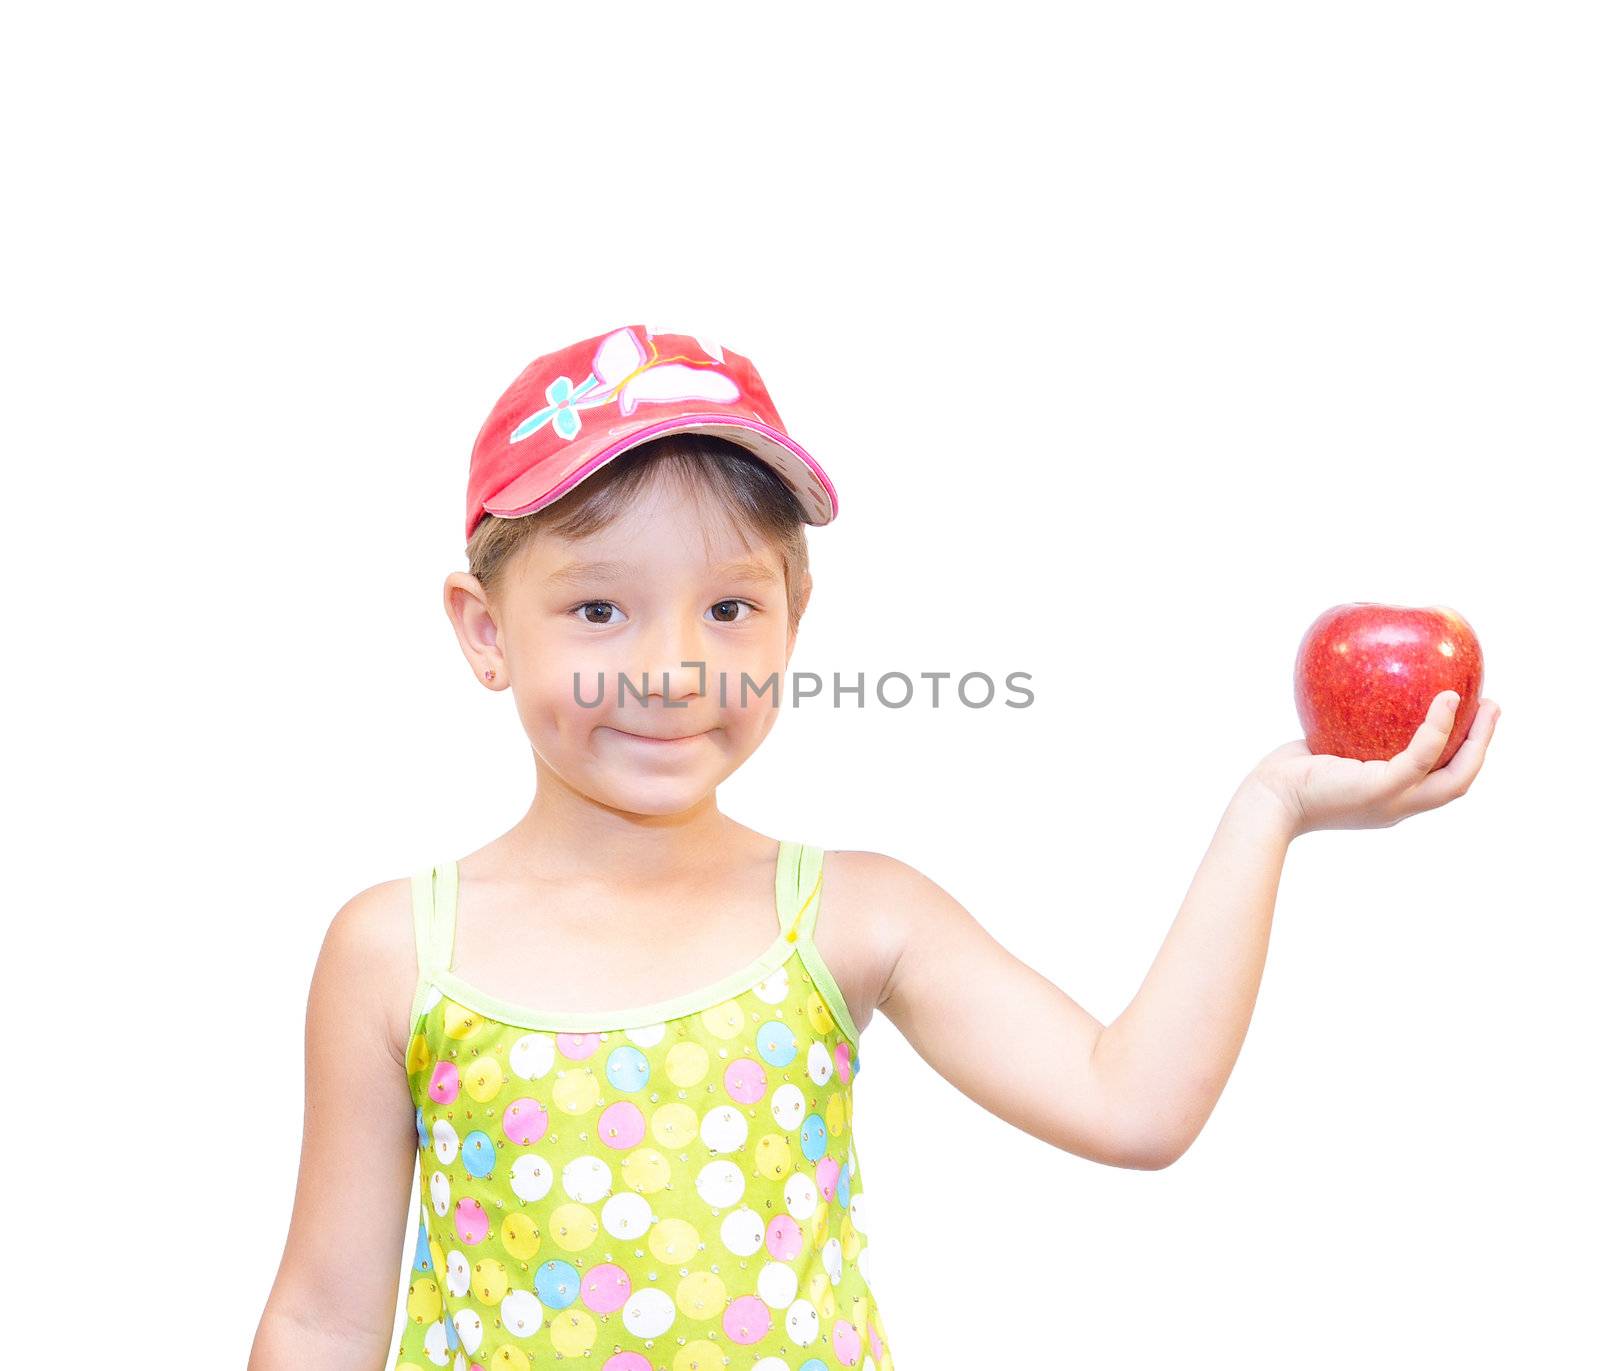 The Child and apple on white background.